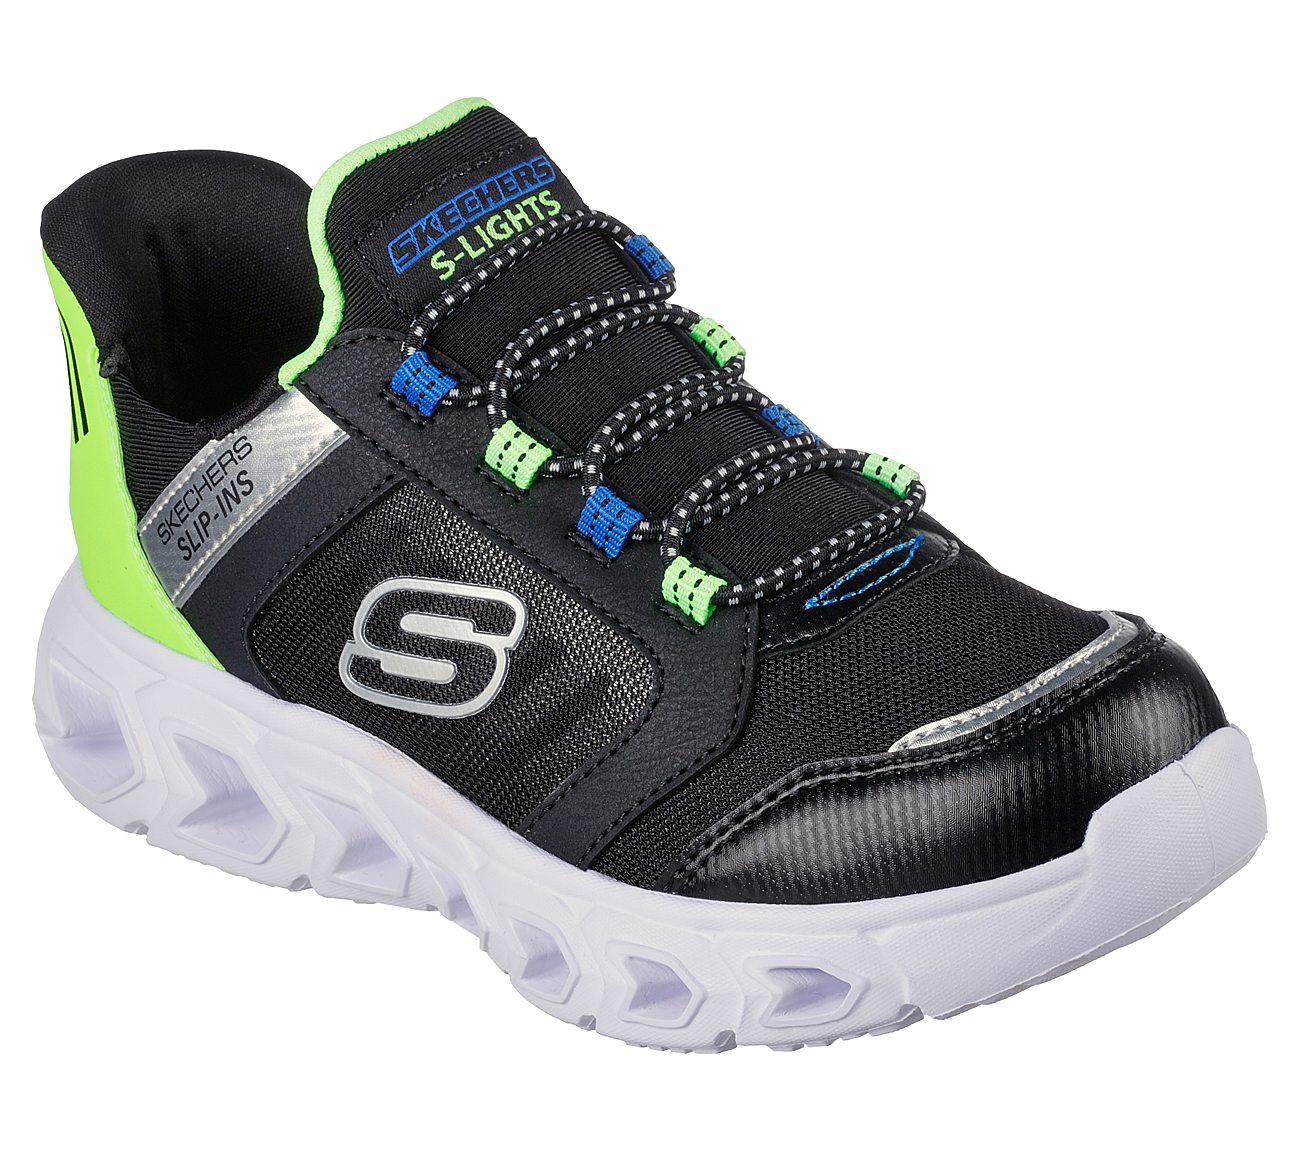 HYPNO-FLASH 2.0 - ODELUX, BLACK/LIME Footwear Right View